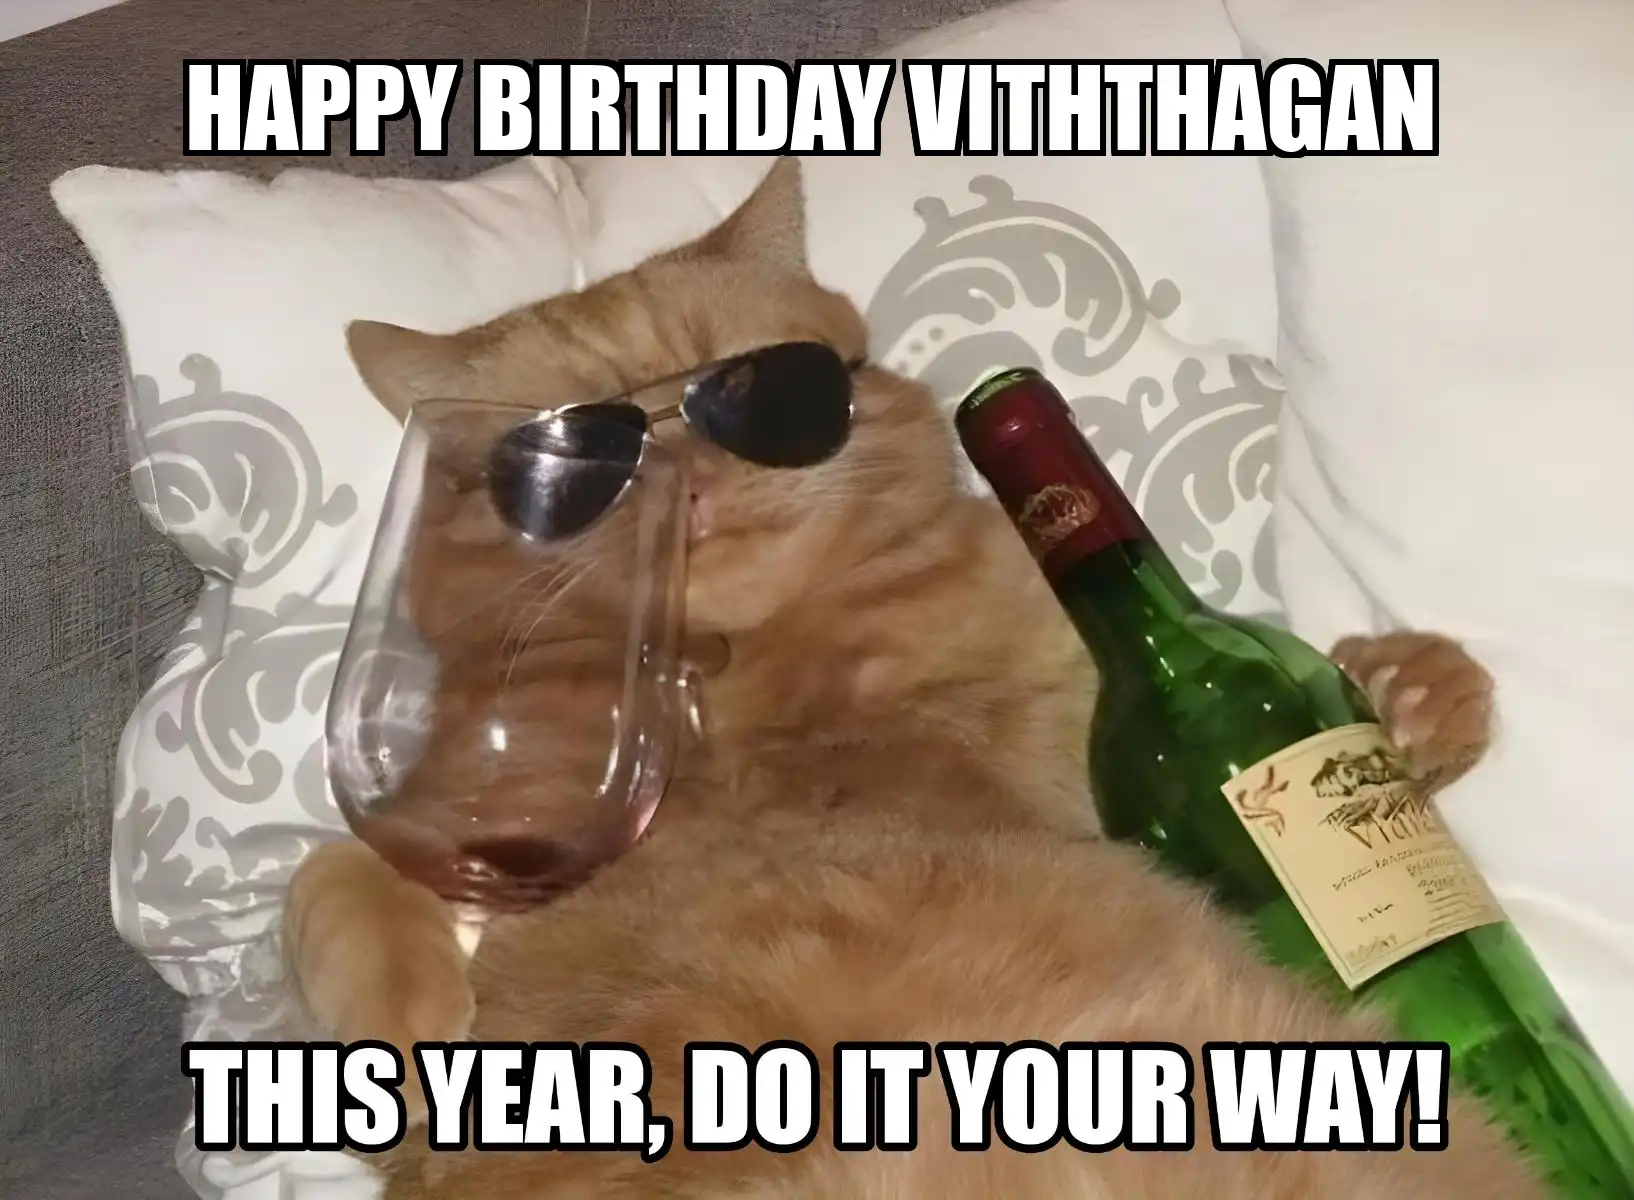 Happy Birthday Viththagan This Year Do It Your Way Meme